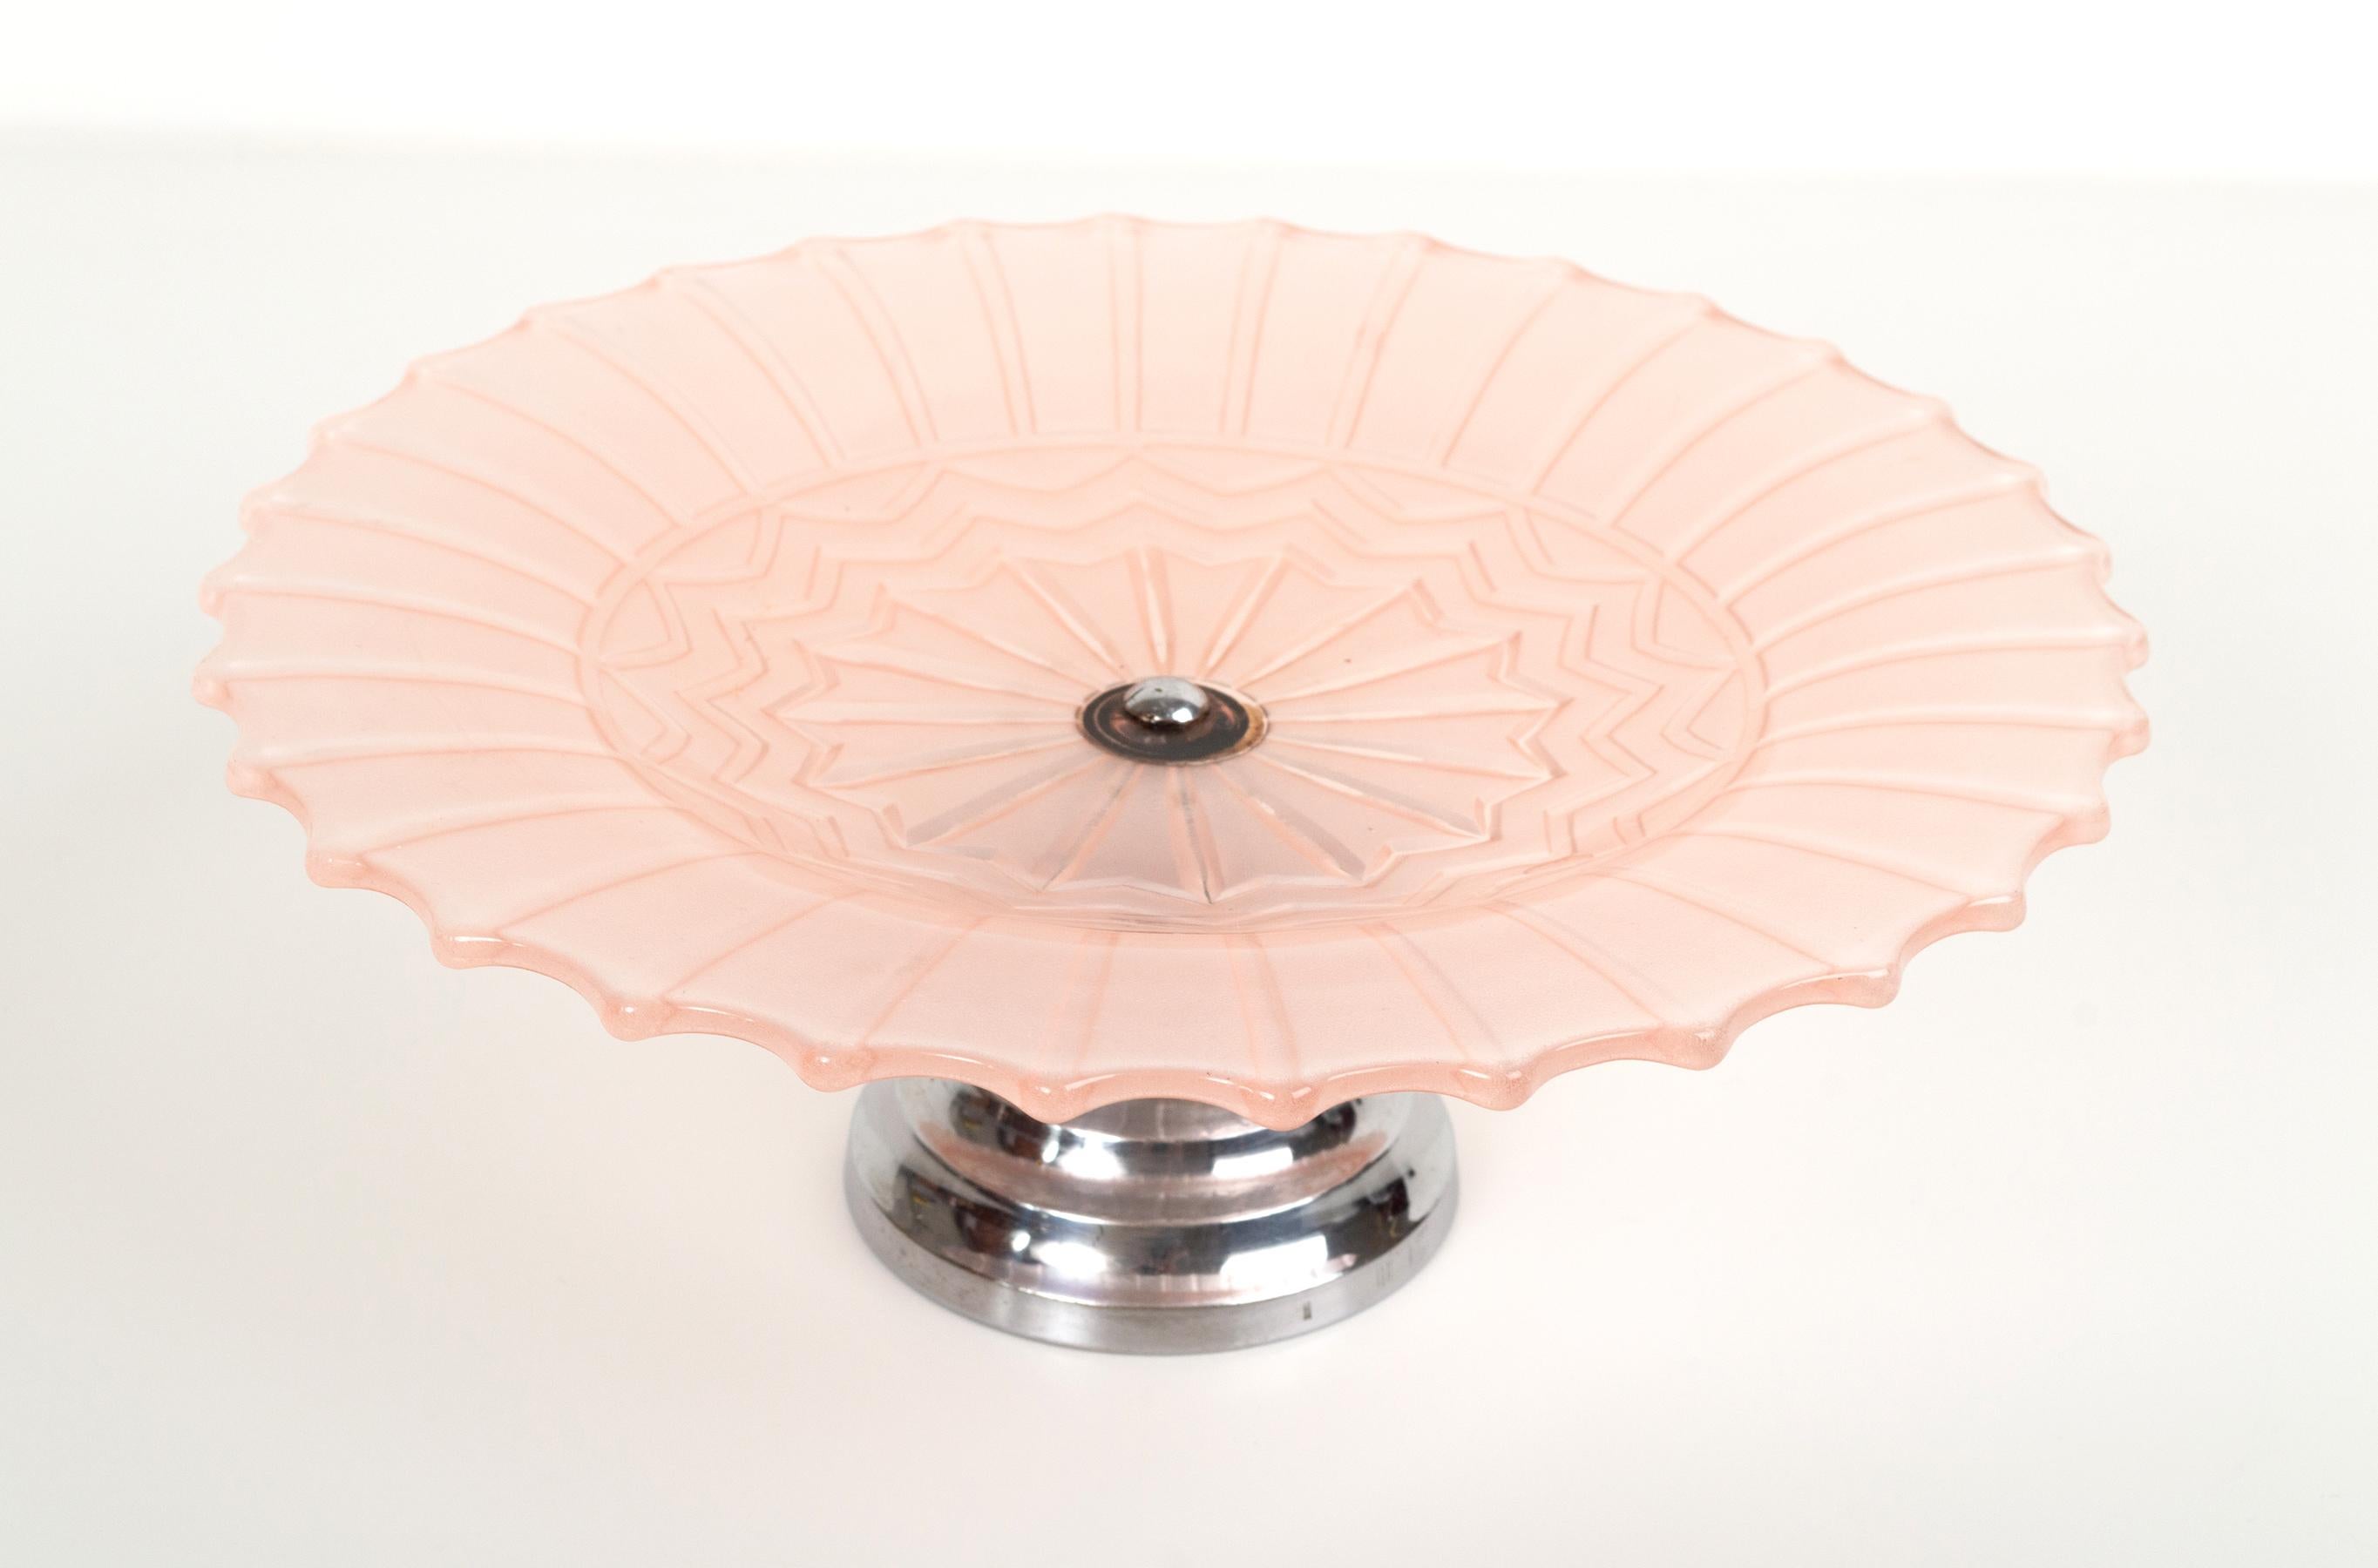 Art Deco pink glass & chrome cake stand platter, England, C.1930.
Presented in very good condition, commensurate of age.